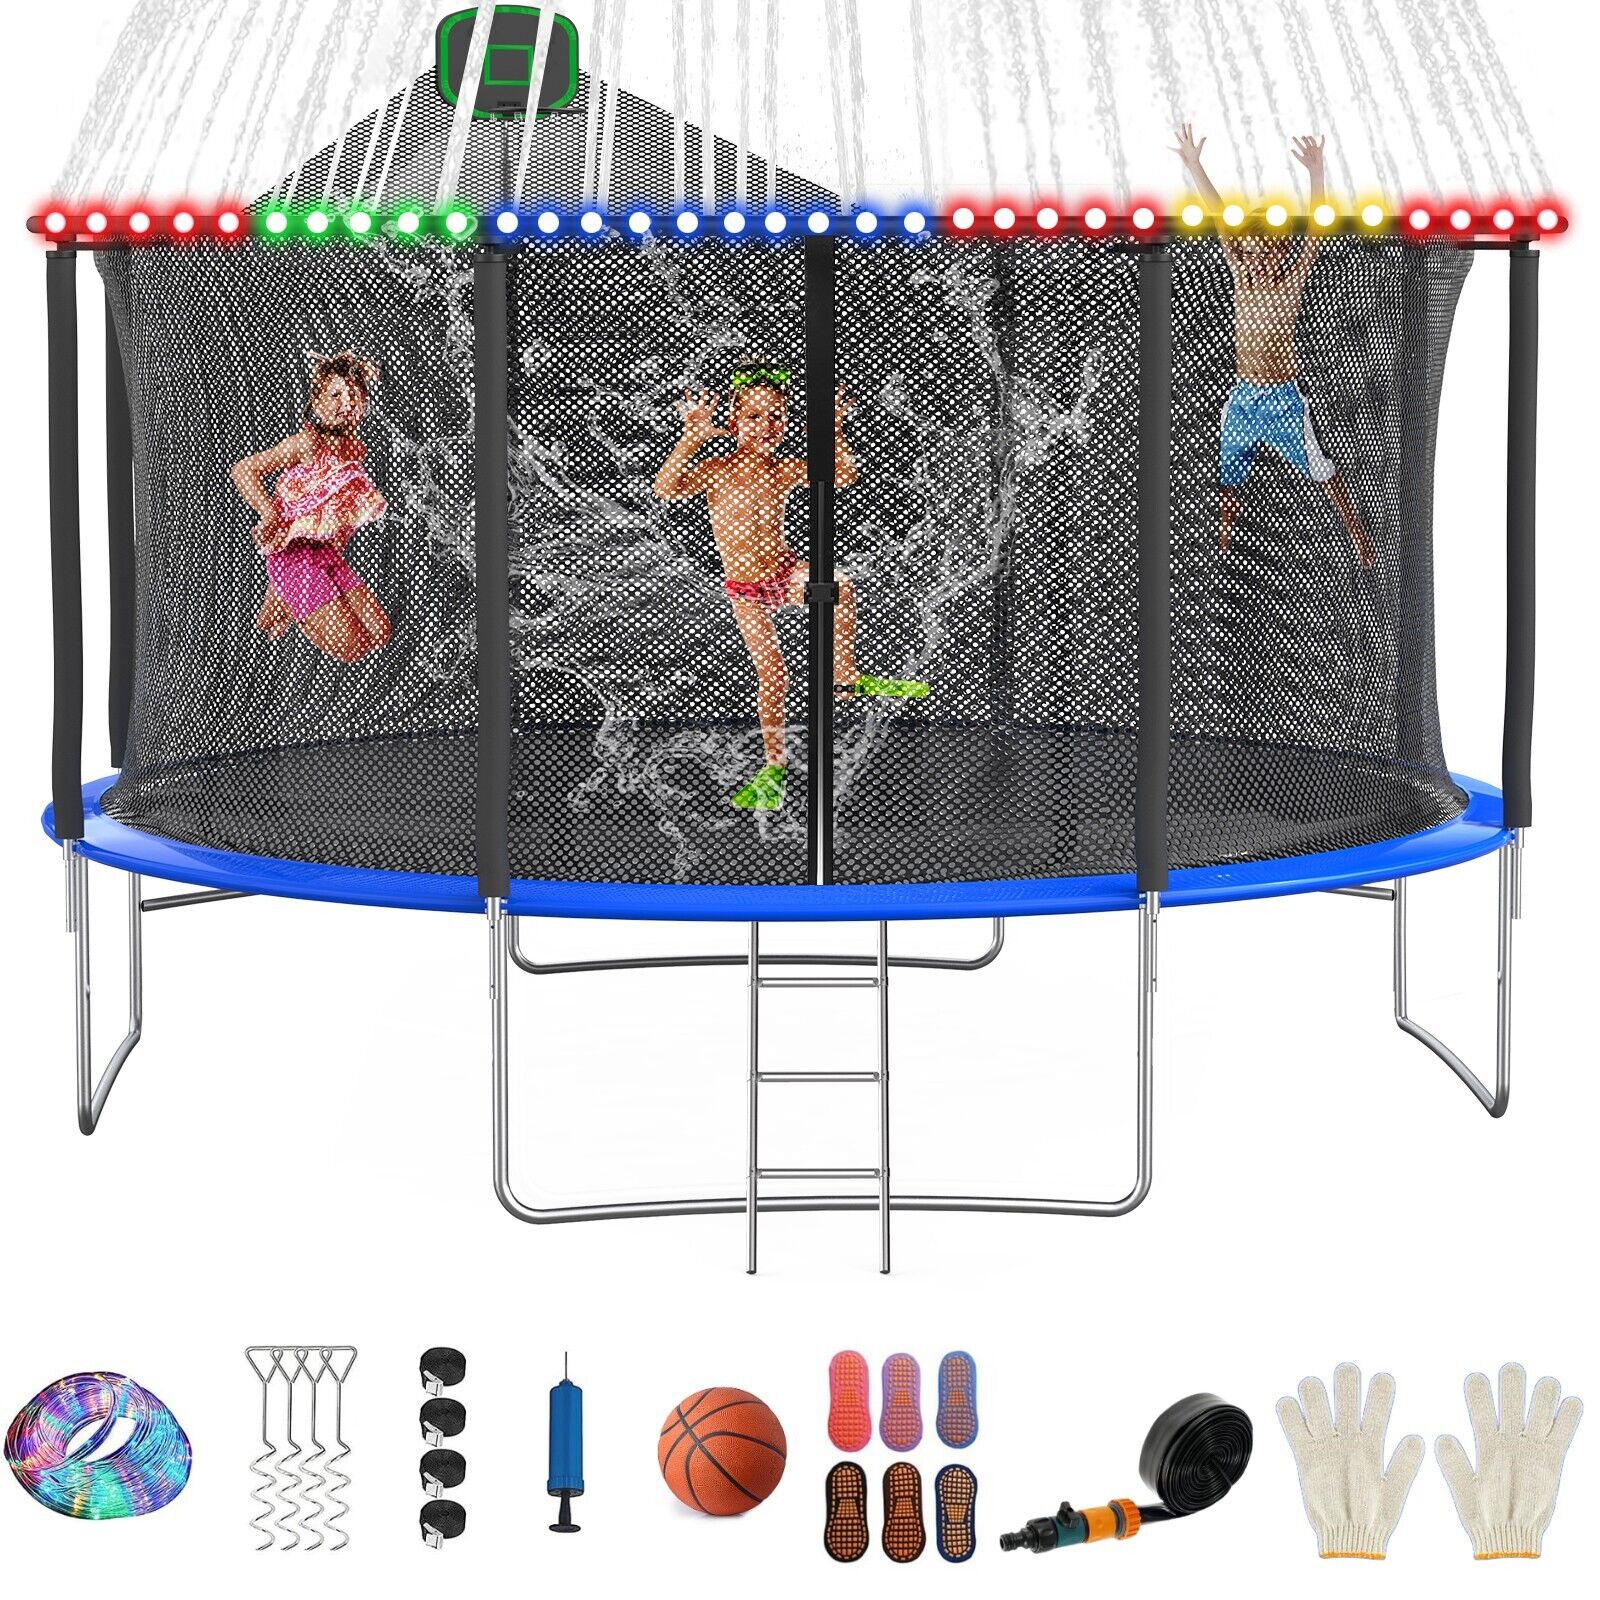 12FT Trampoline for Kids and Adult Large Outdoor Trampoline with Basketball Hoop